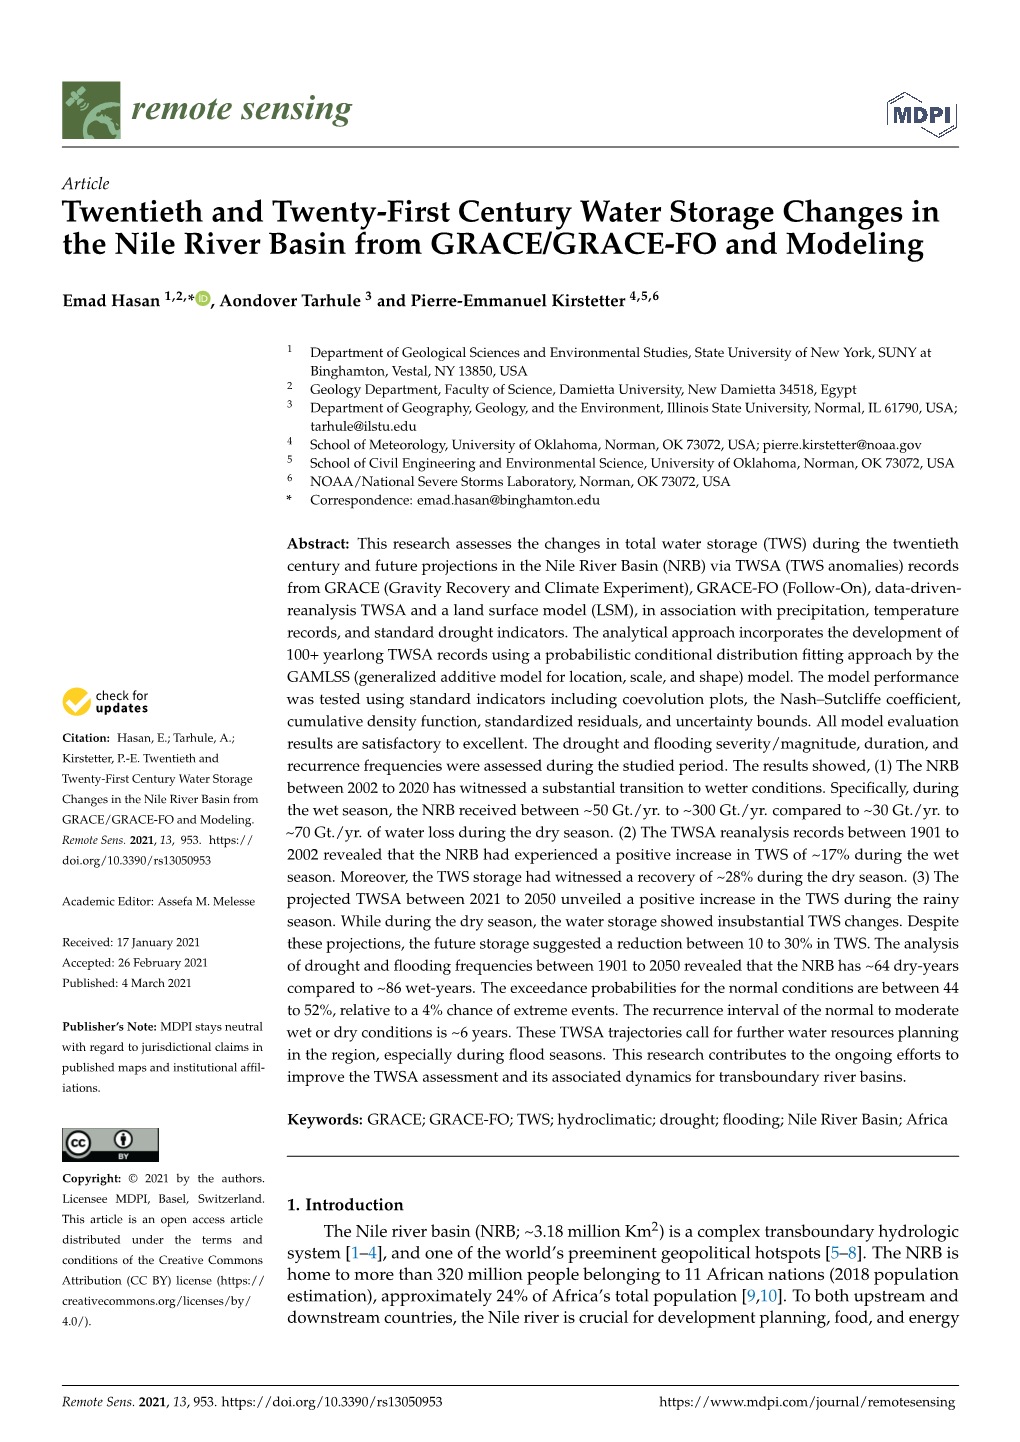 Twentieth and Twenty-First Century Water Storage Changes in the Nile River Basin from GRACE/GRACE-FO and Modeling